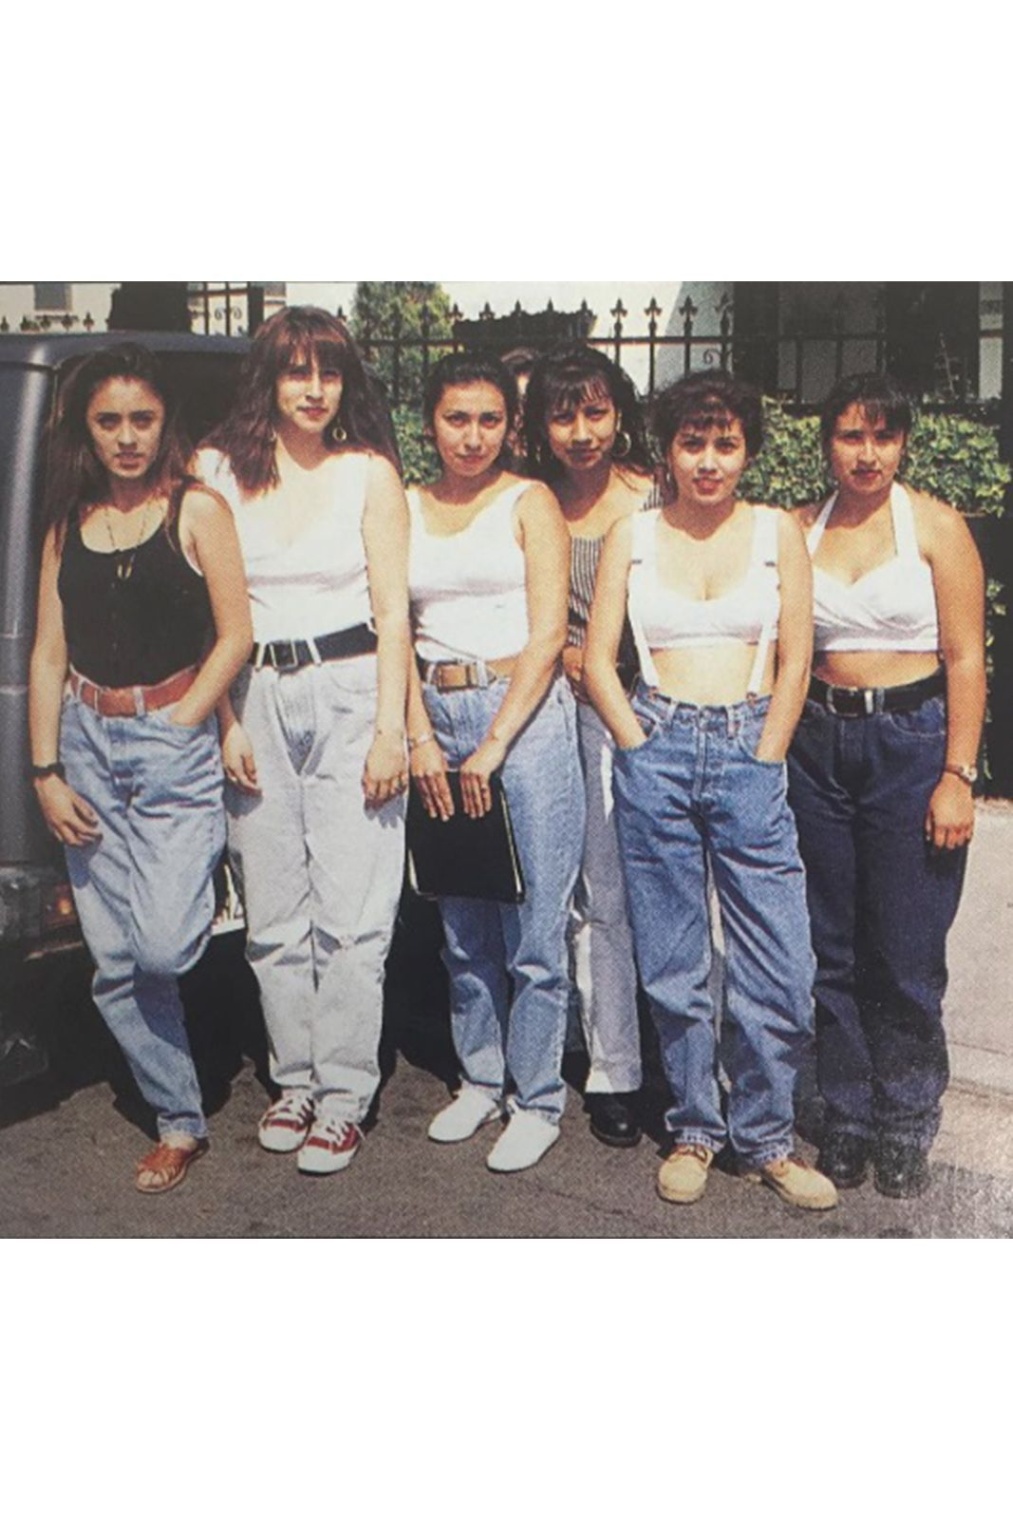 80s chicano fashion Bulan 4 This Instagram Captures The Glory Days Of L.A